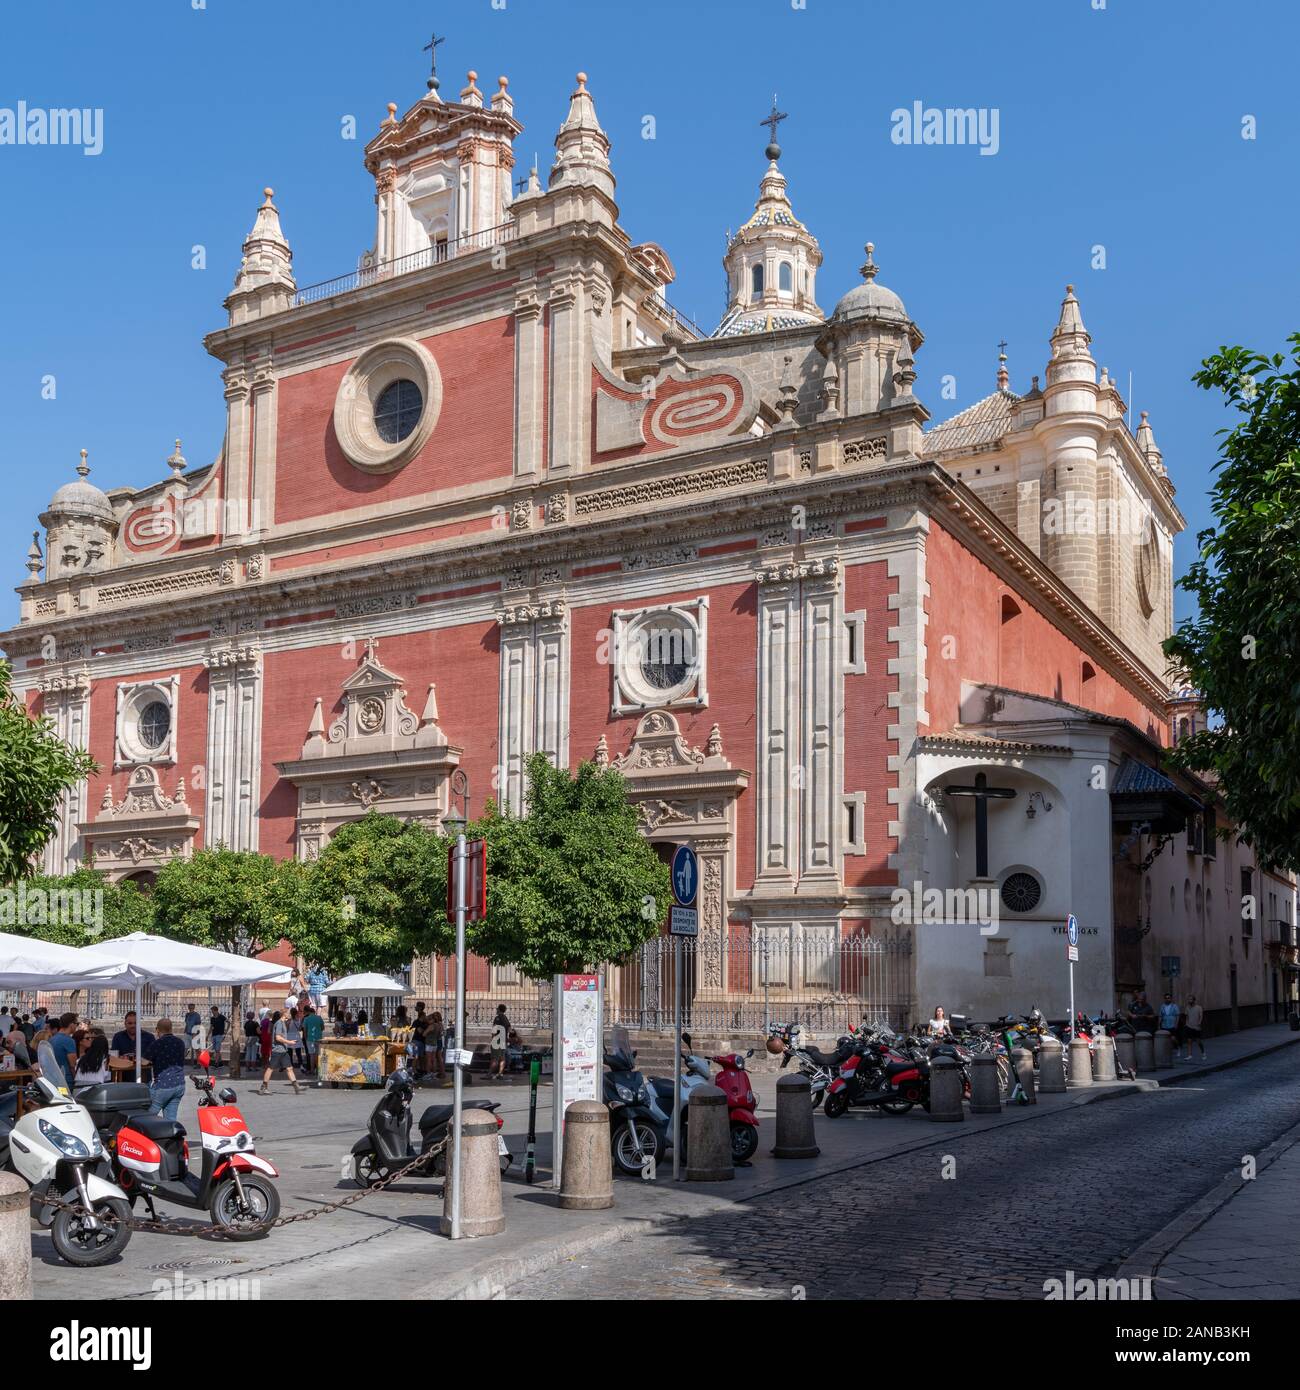 The ornate mannerist facade of the Iglesia Colegial del Salvador, Seville's 2nd largest church, stands on the former site of the city's largest mosque Stock Photo